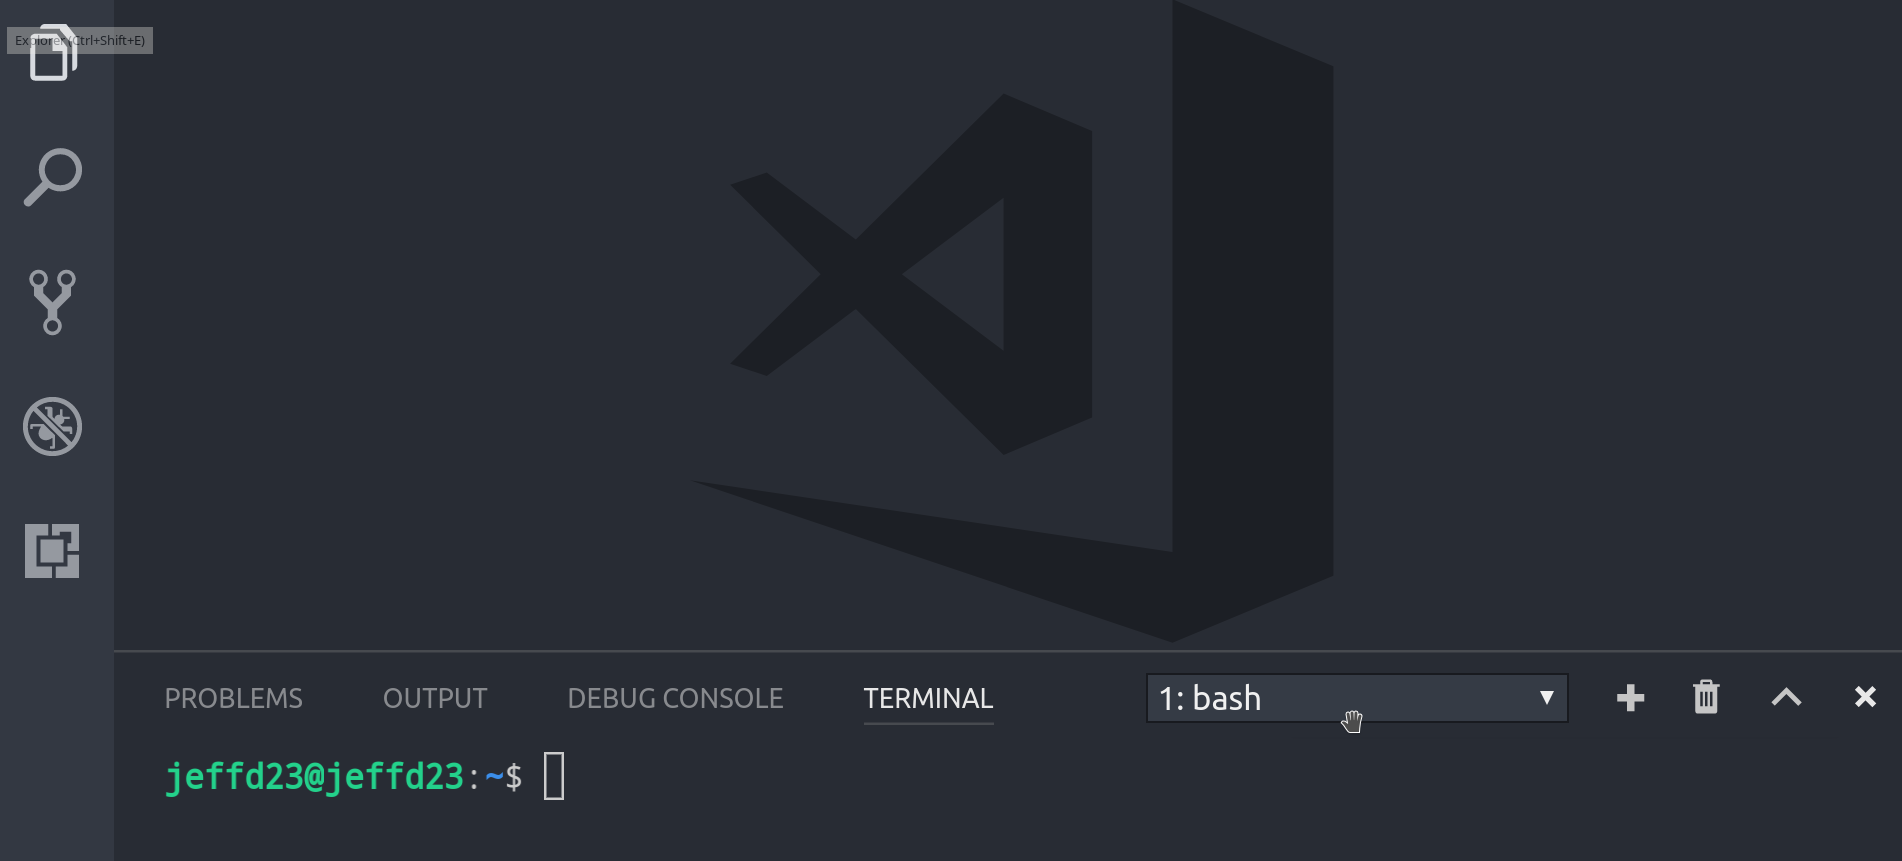 Open a blank vscode project